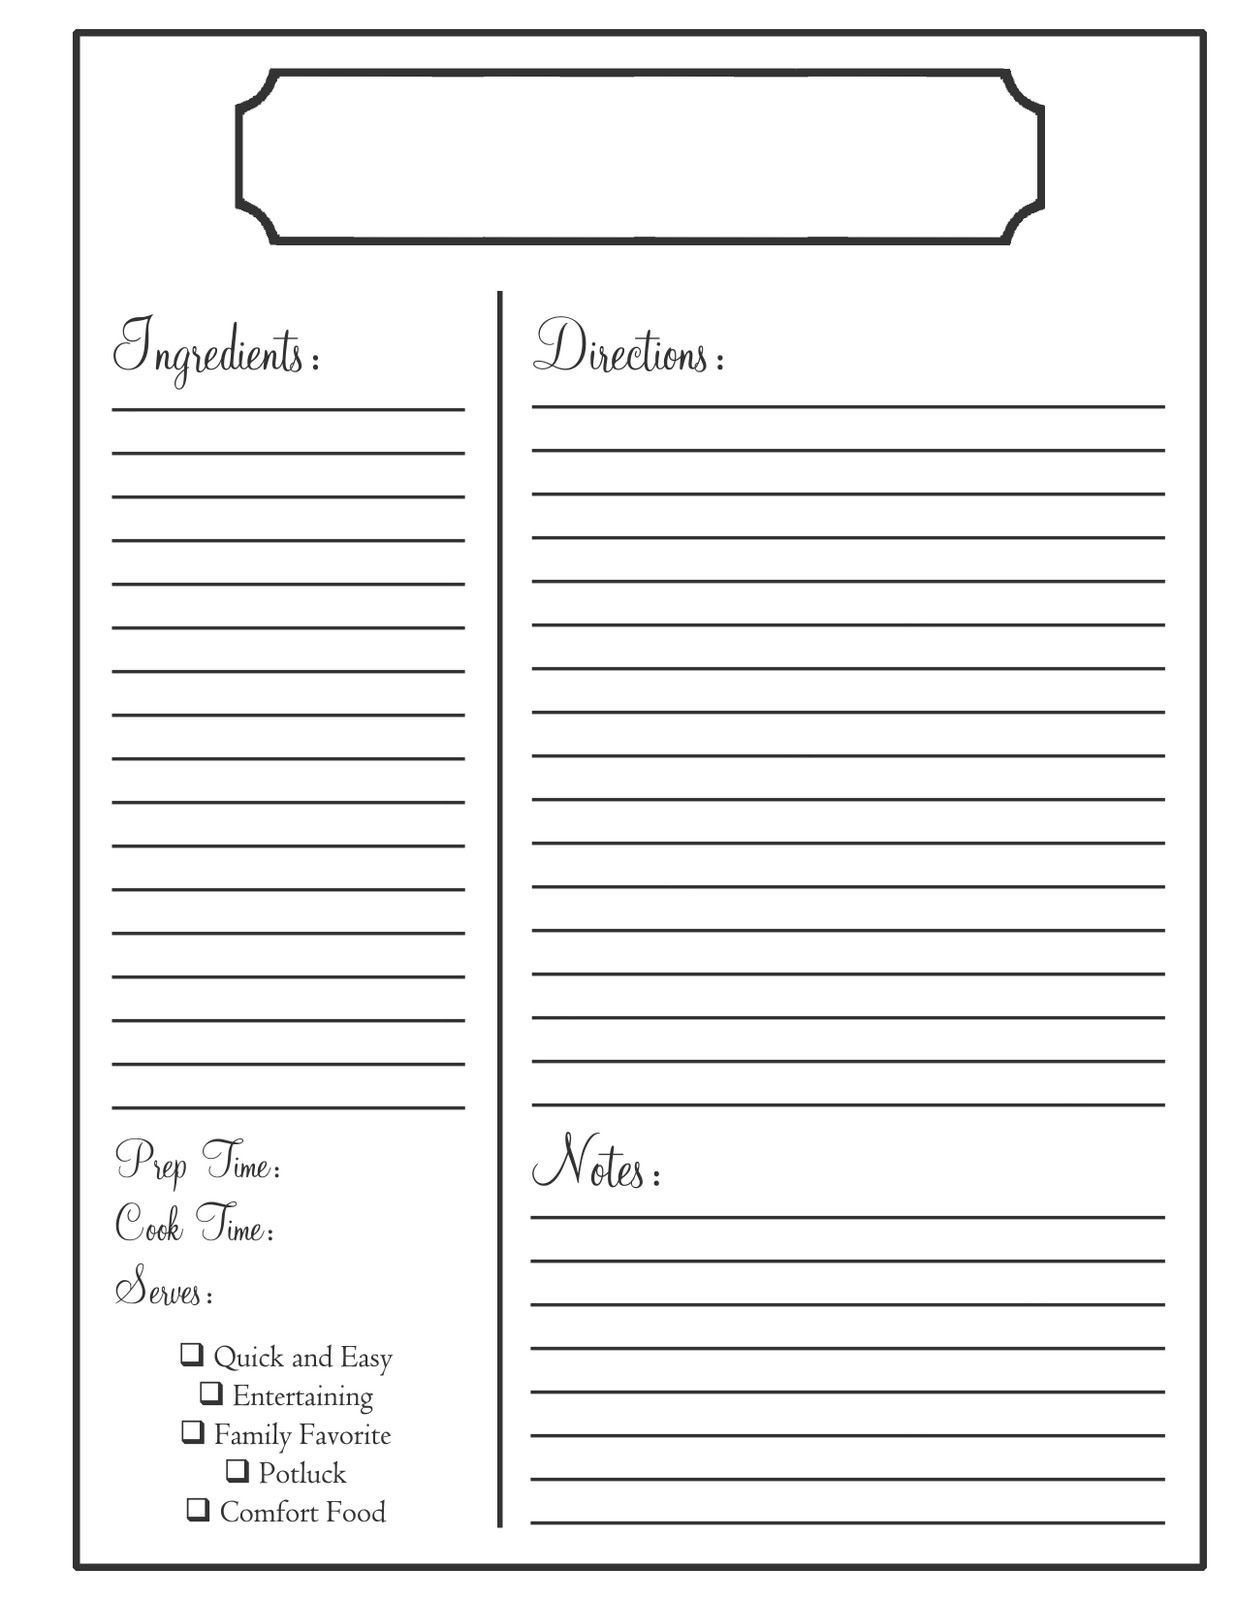 Printable Blank Recipe Pages_25896